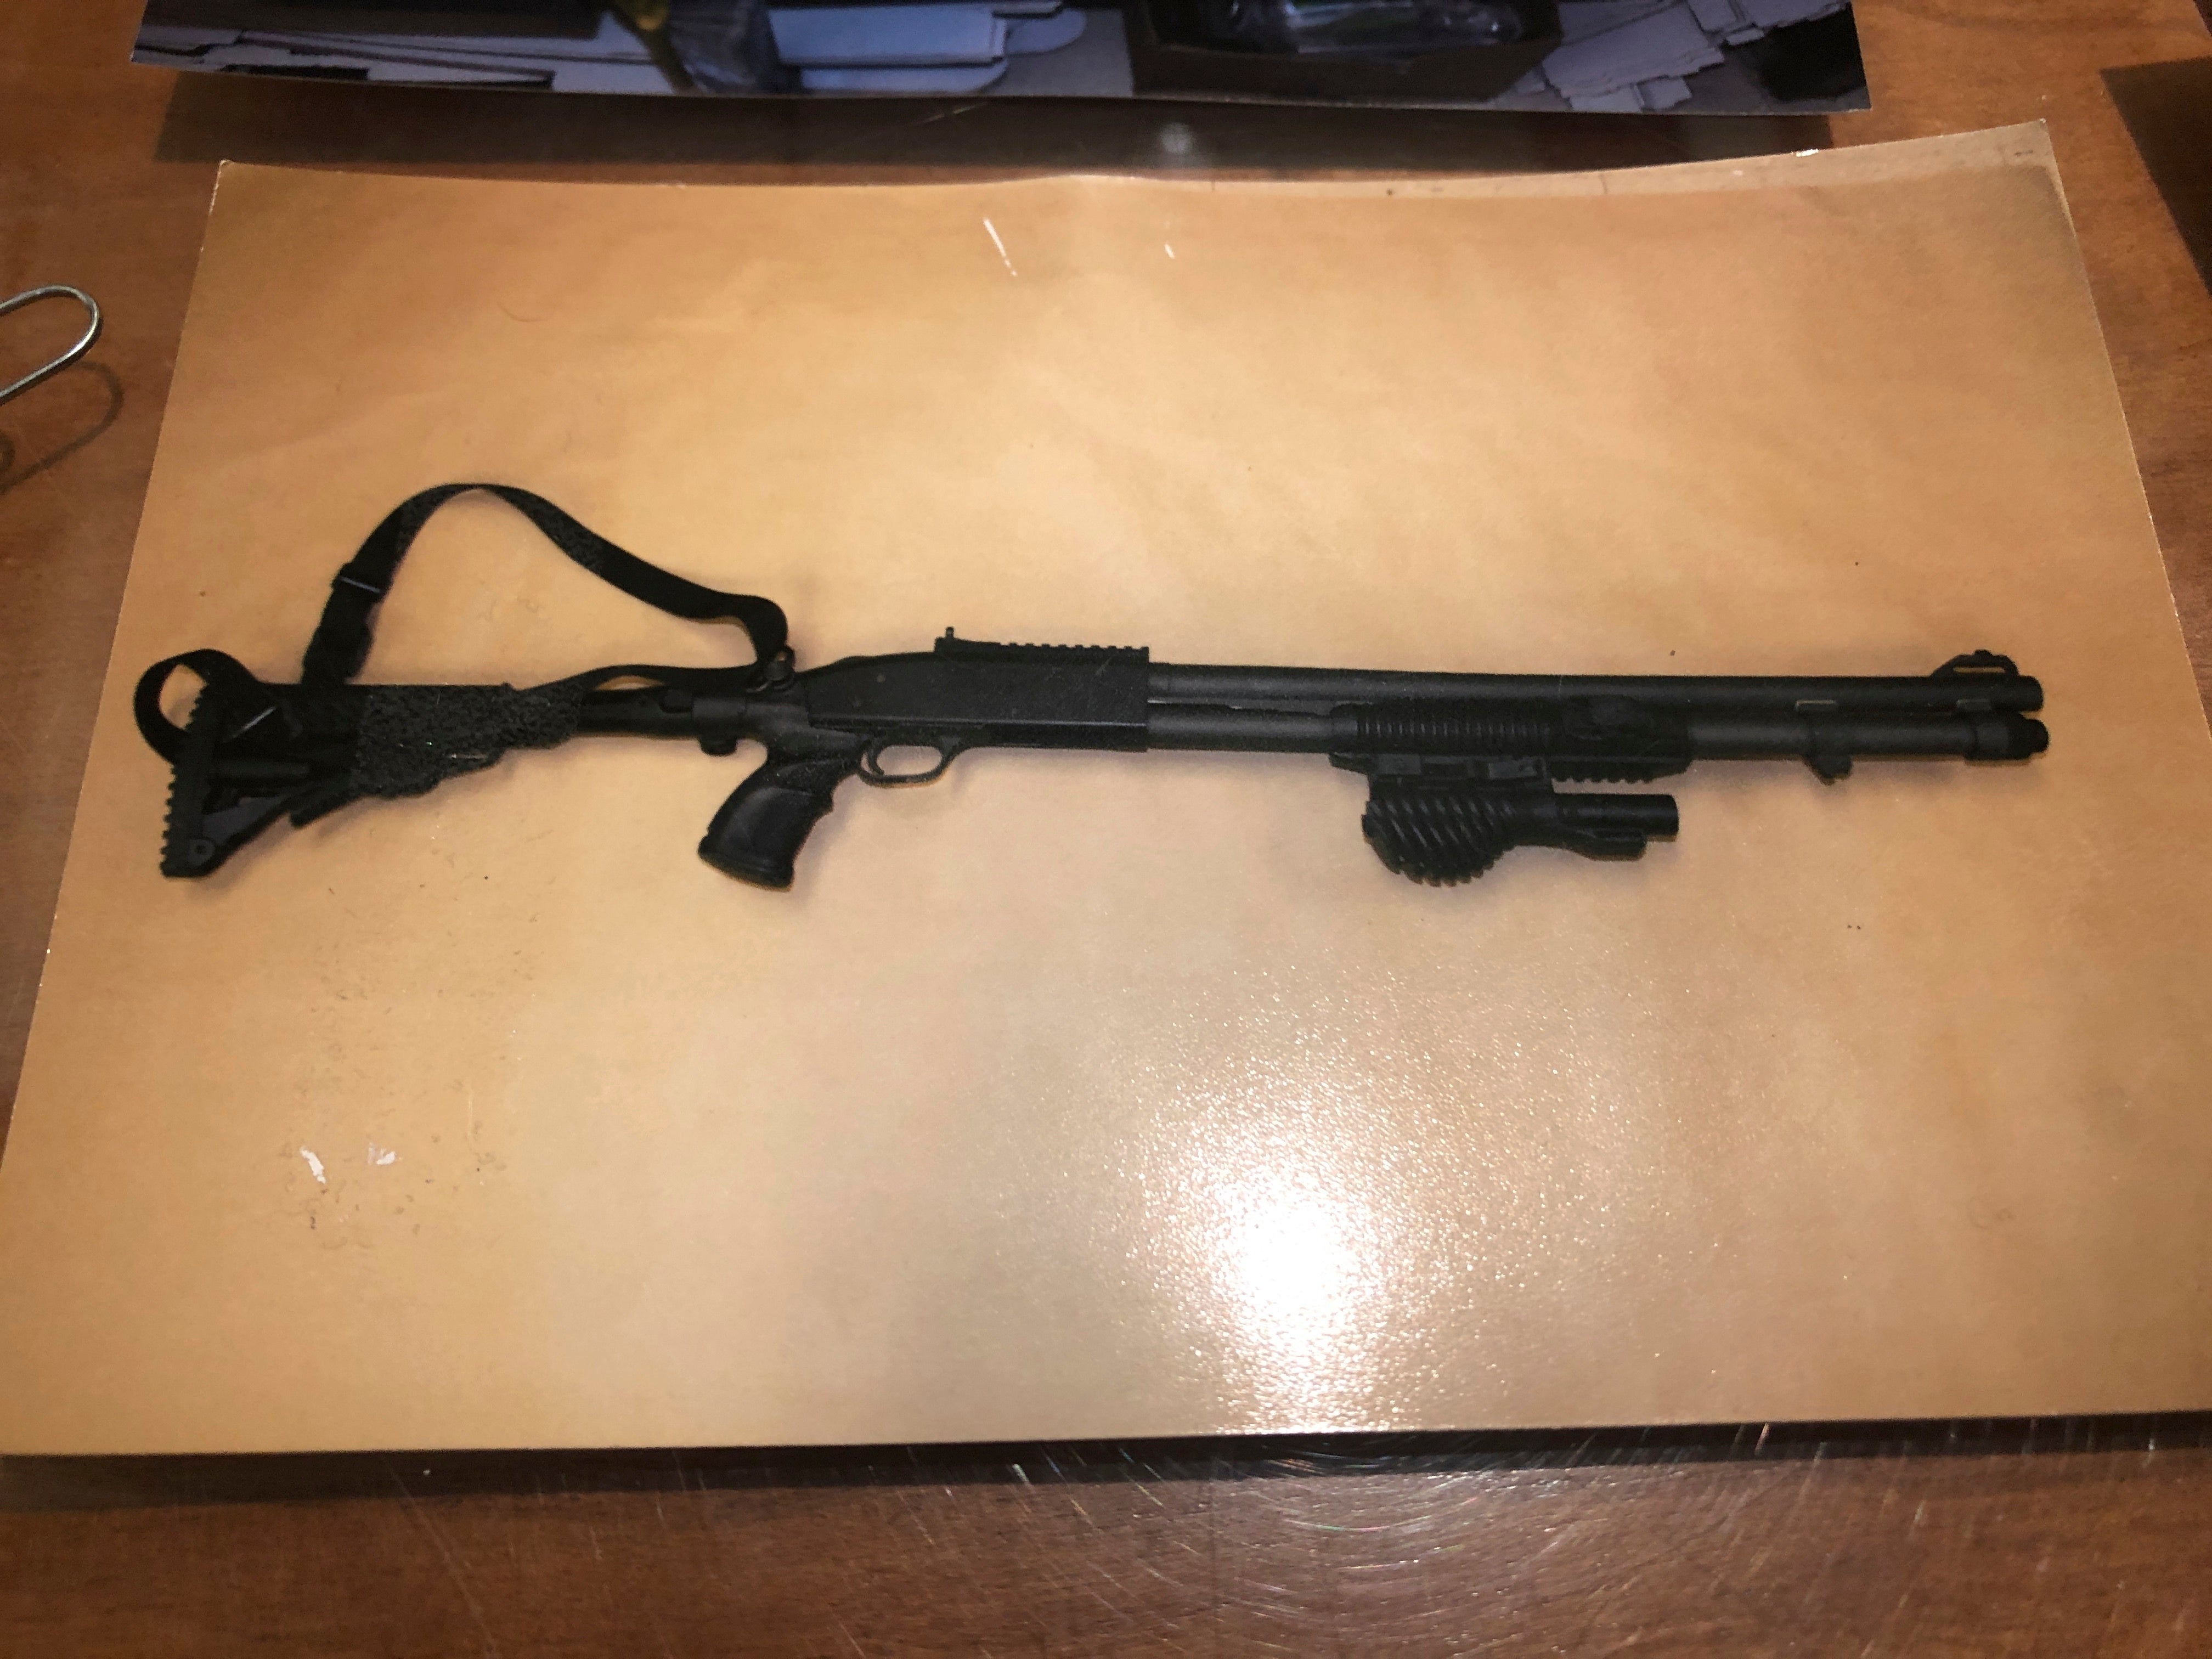 A photograph of the 12-gauge Mossberg shotgun authorities say was used by Jarrod Ramos in the mass shooting at the Capital Gazette newspaper three years ago is shown in evidence after court on Tuesday, June 29, 2021 in Annapolis, Md.